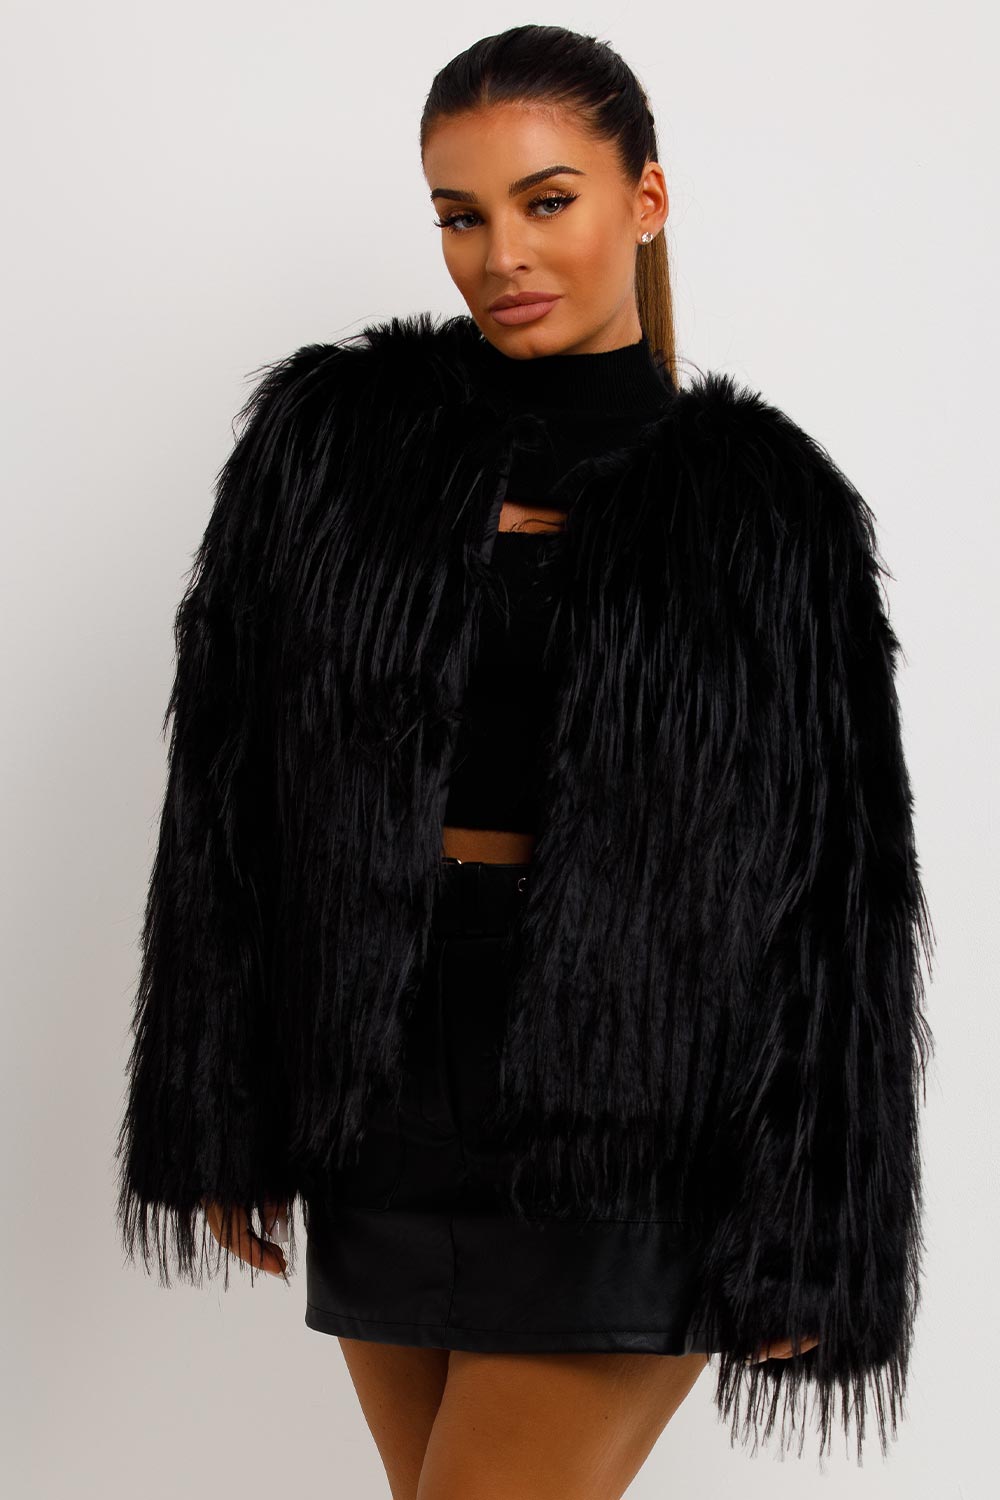 womens shaggy fur jacket black winter outfit